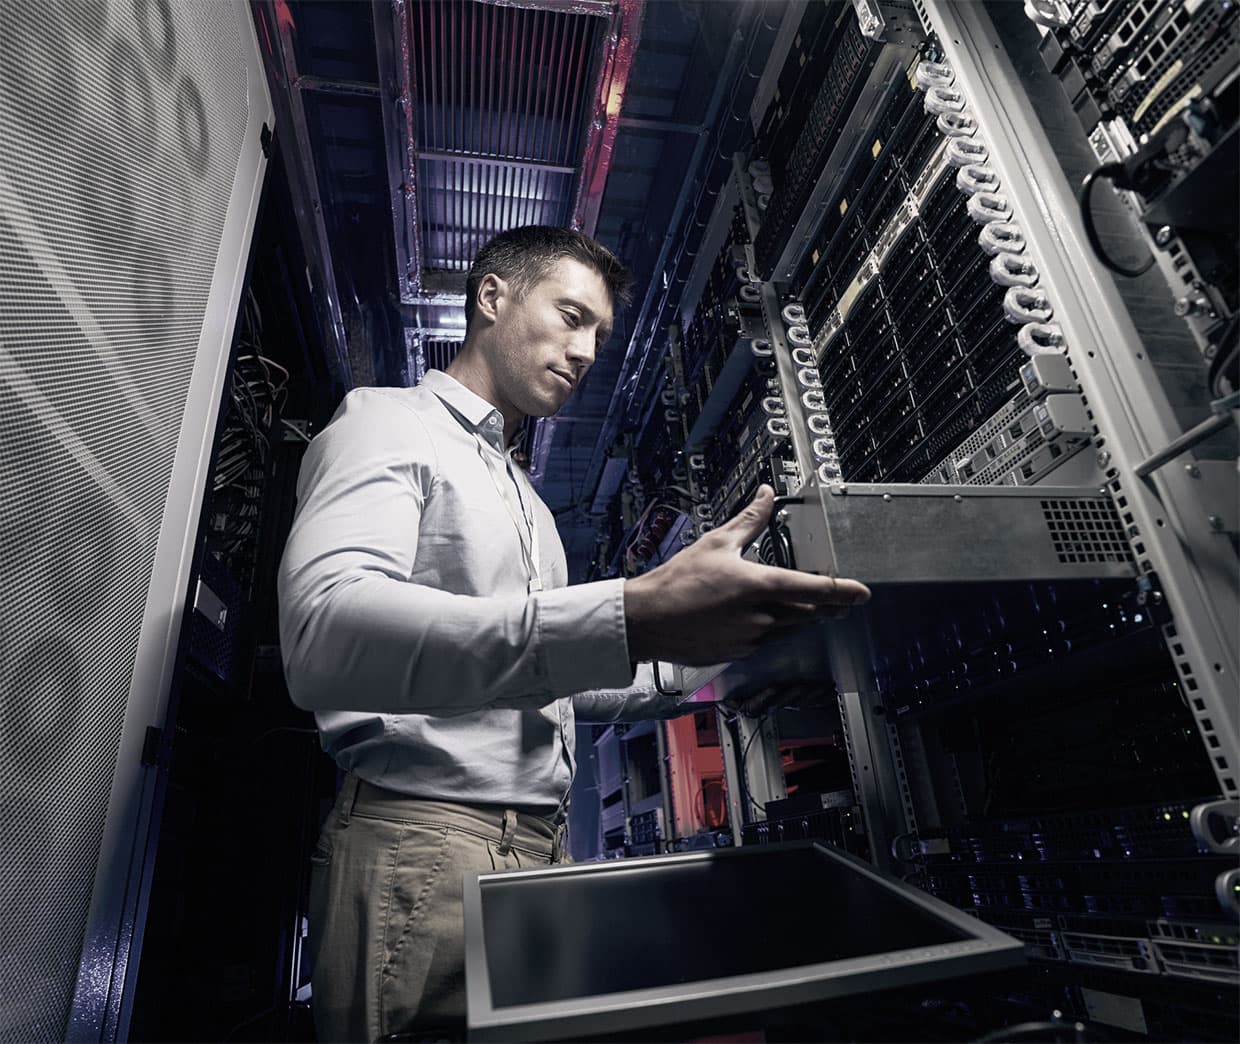 Ottawa managed IT systems administrator technician servicing a server in a datacenter.